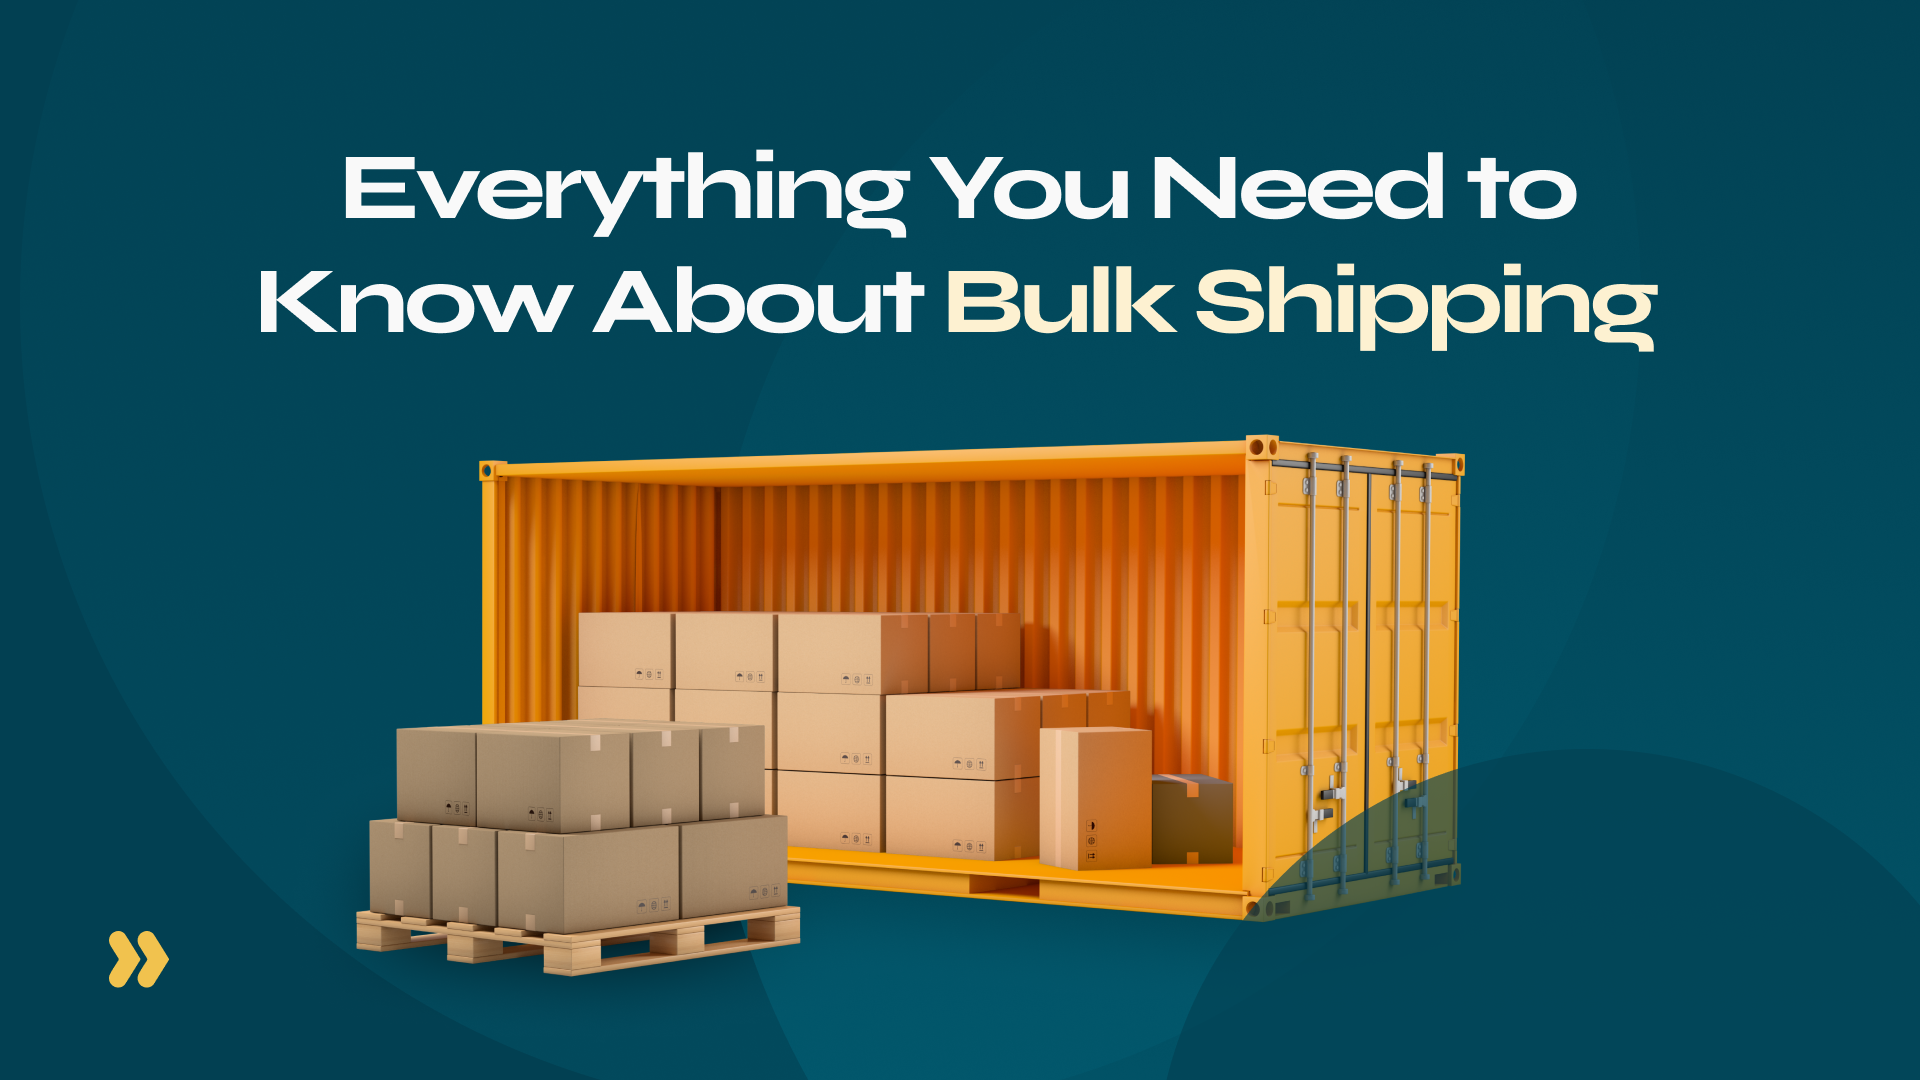 Everything You Need to Know About Bulk Shipping